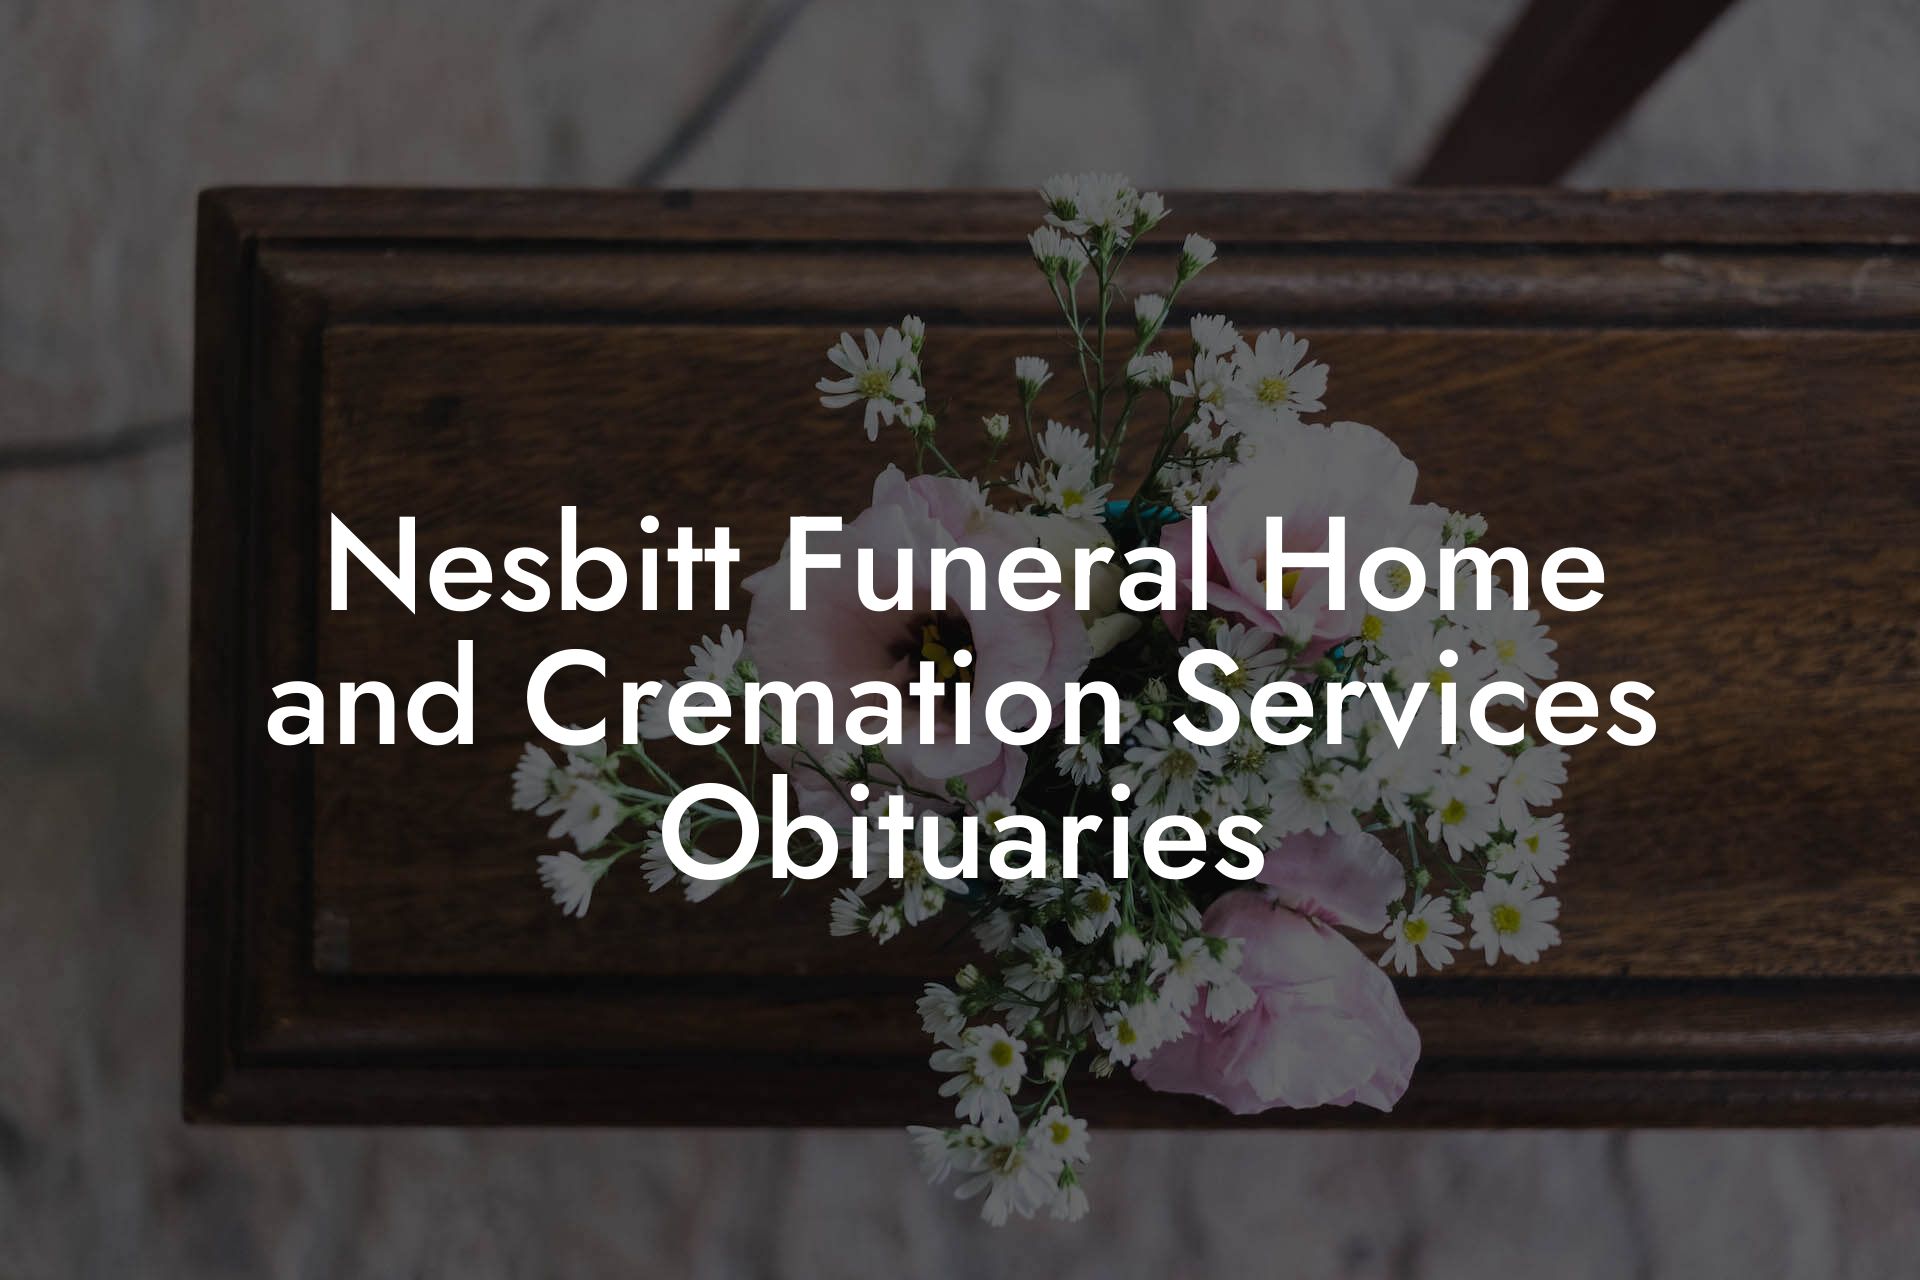 Nesbitt Funeral Home and Cremation Services Obituaries